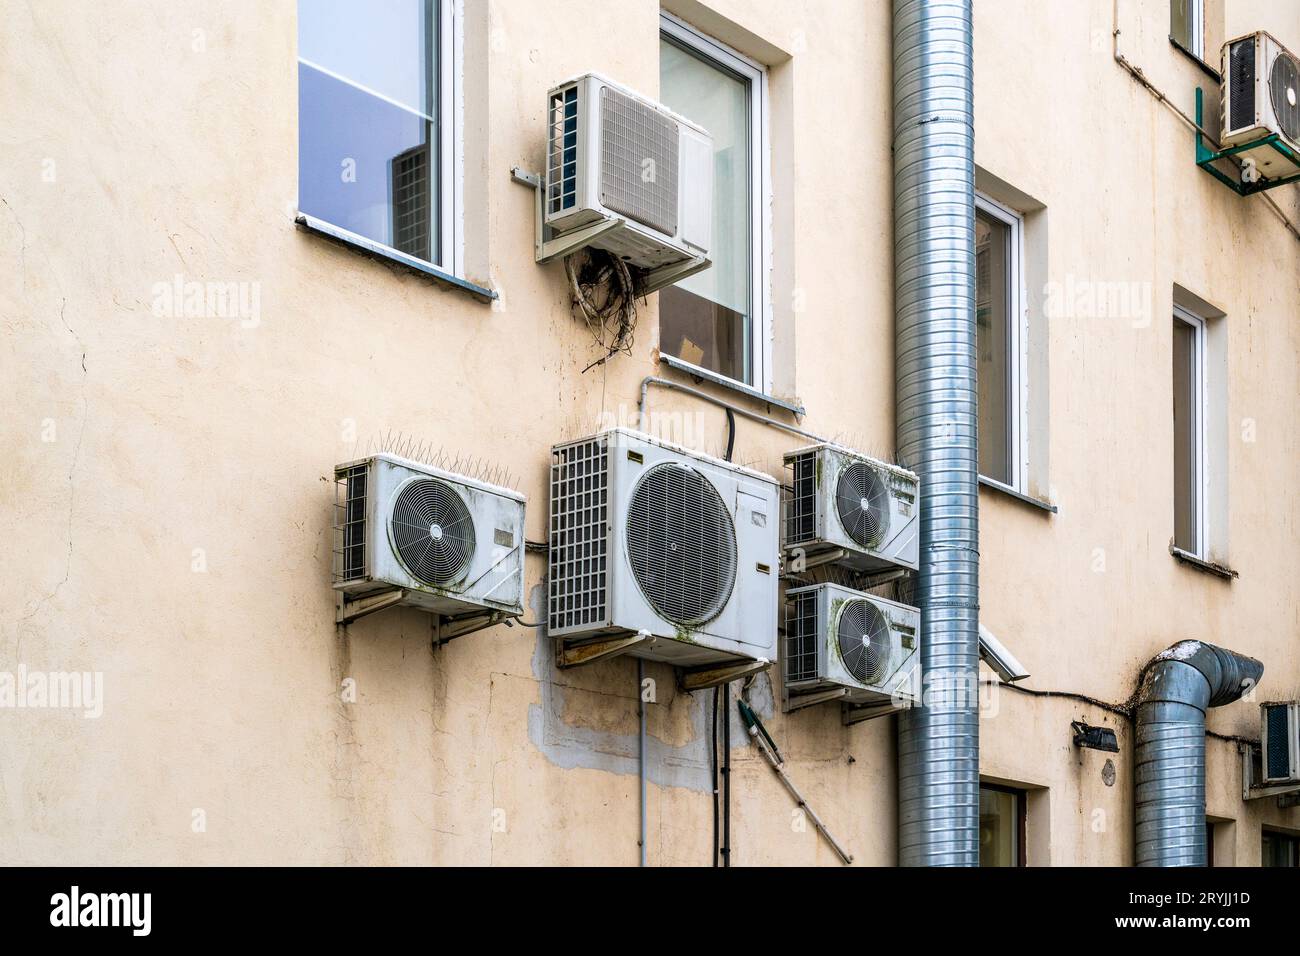 Old air-conditioners hangs on the facade of old building Stock Photo